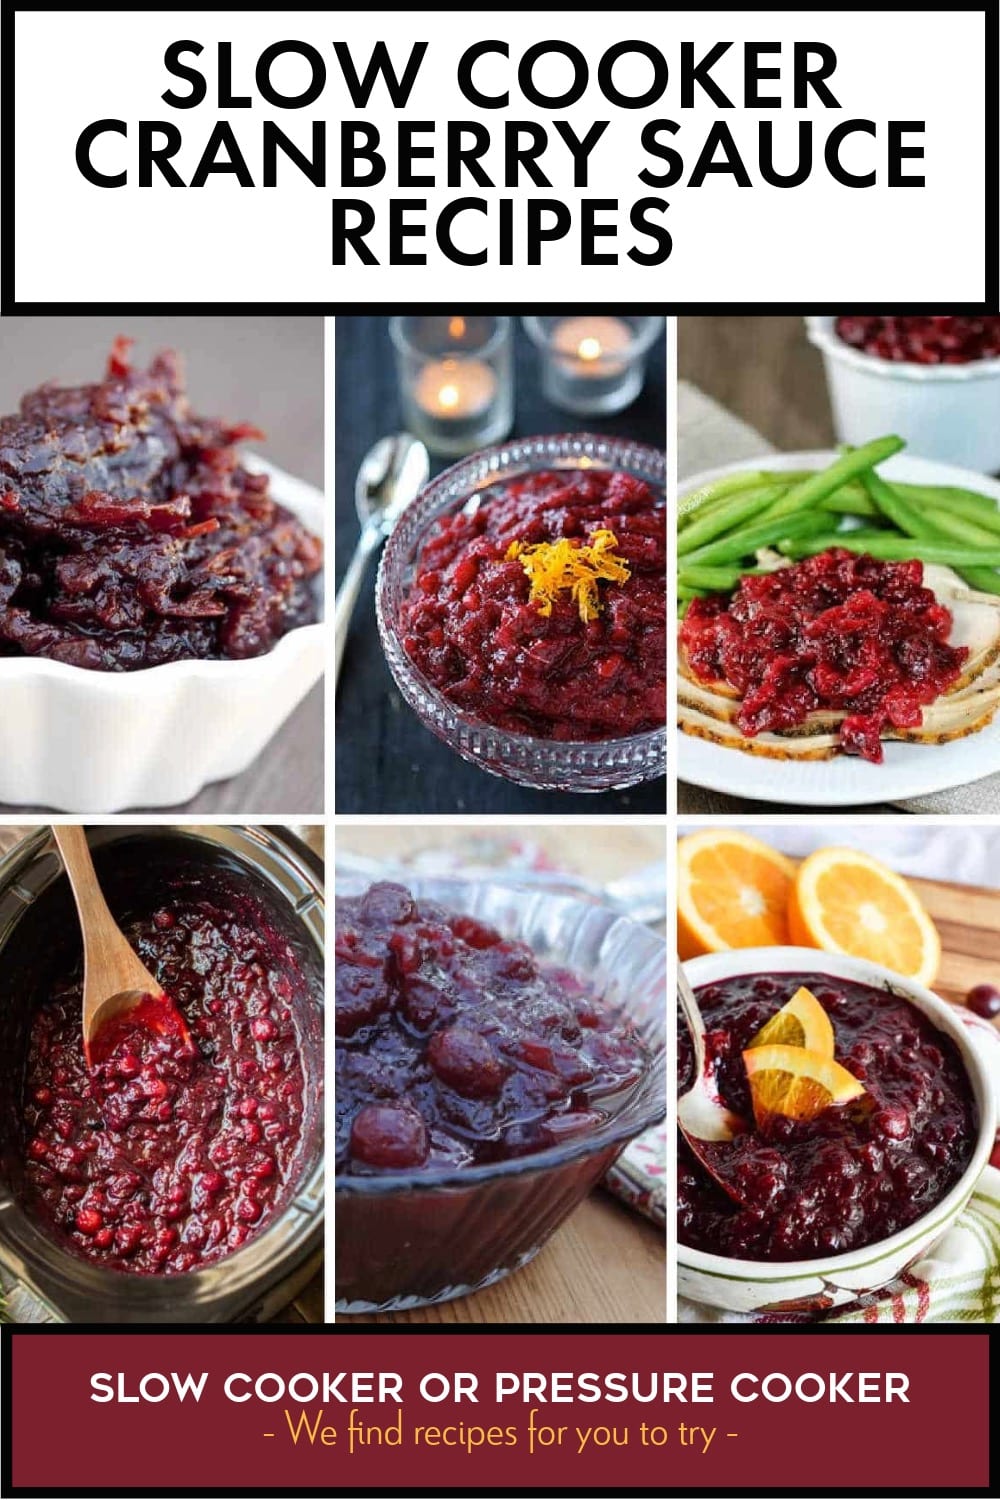 Pinterest image of Slow Cooker Cranberry Sauce Recipes